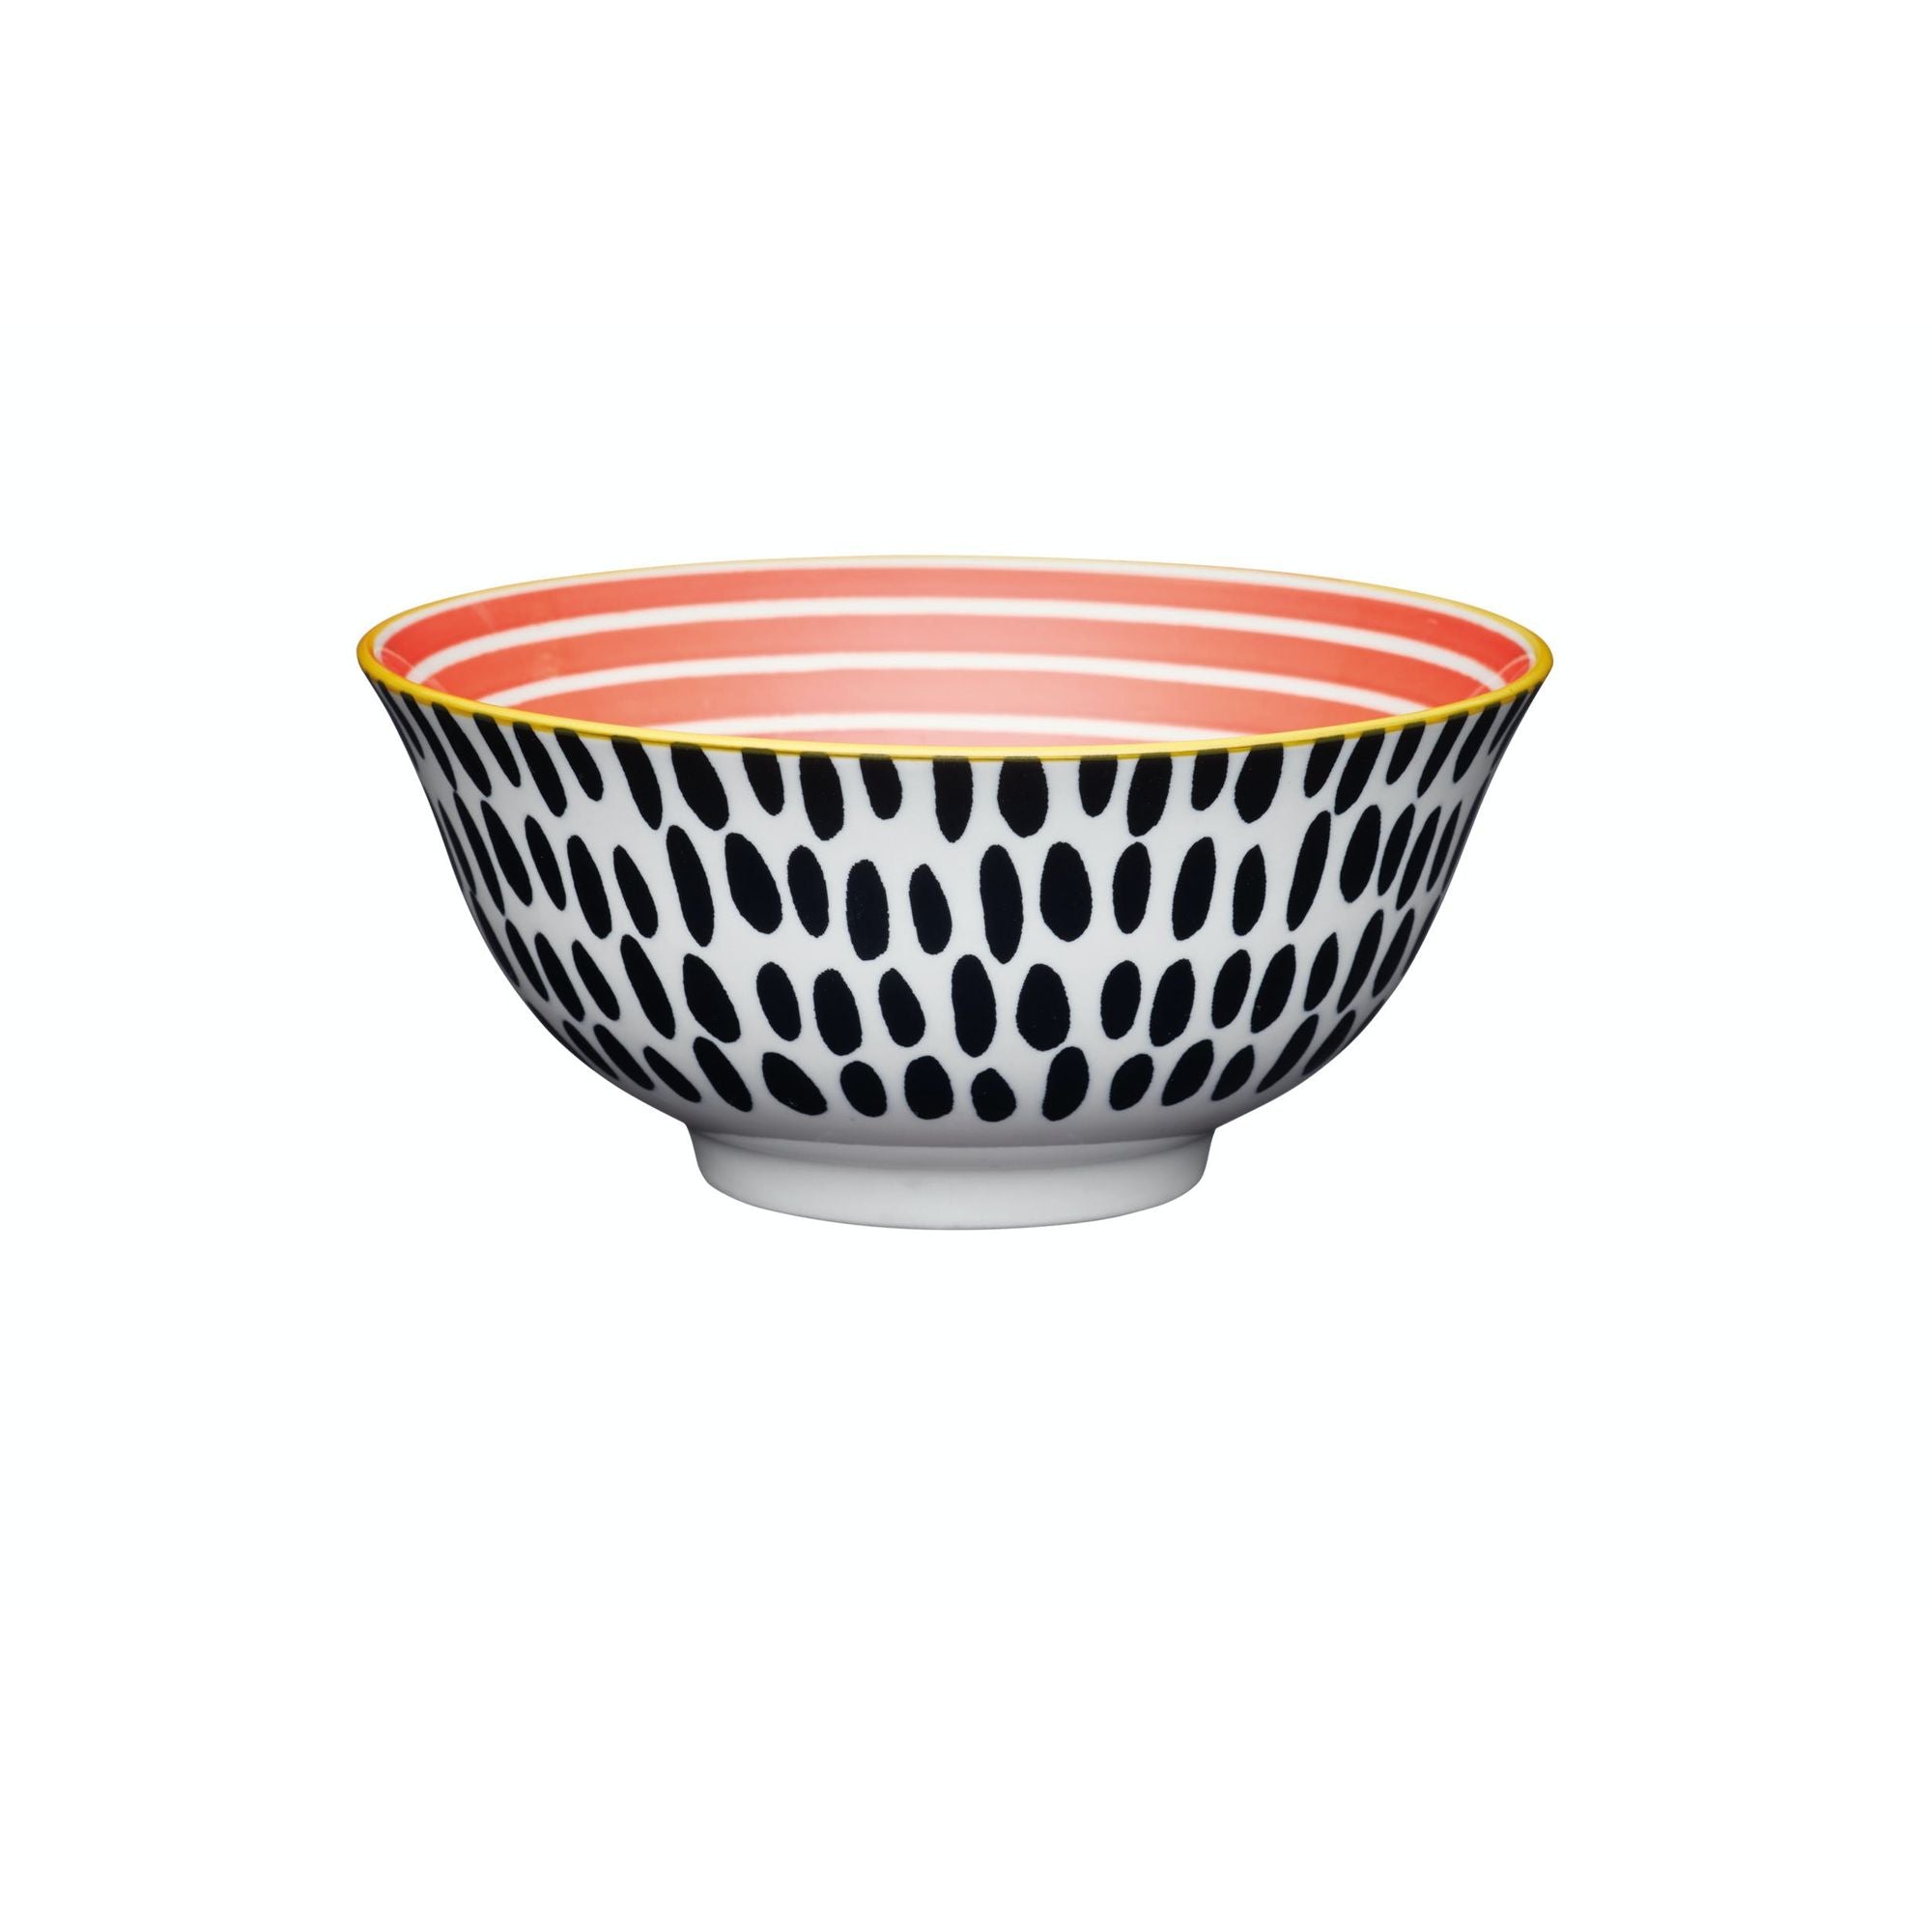 Mikasa Does It All Bowl - Red Swirl